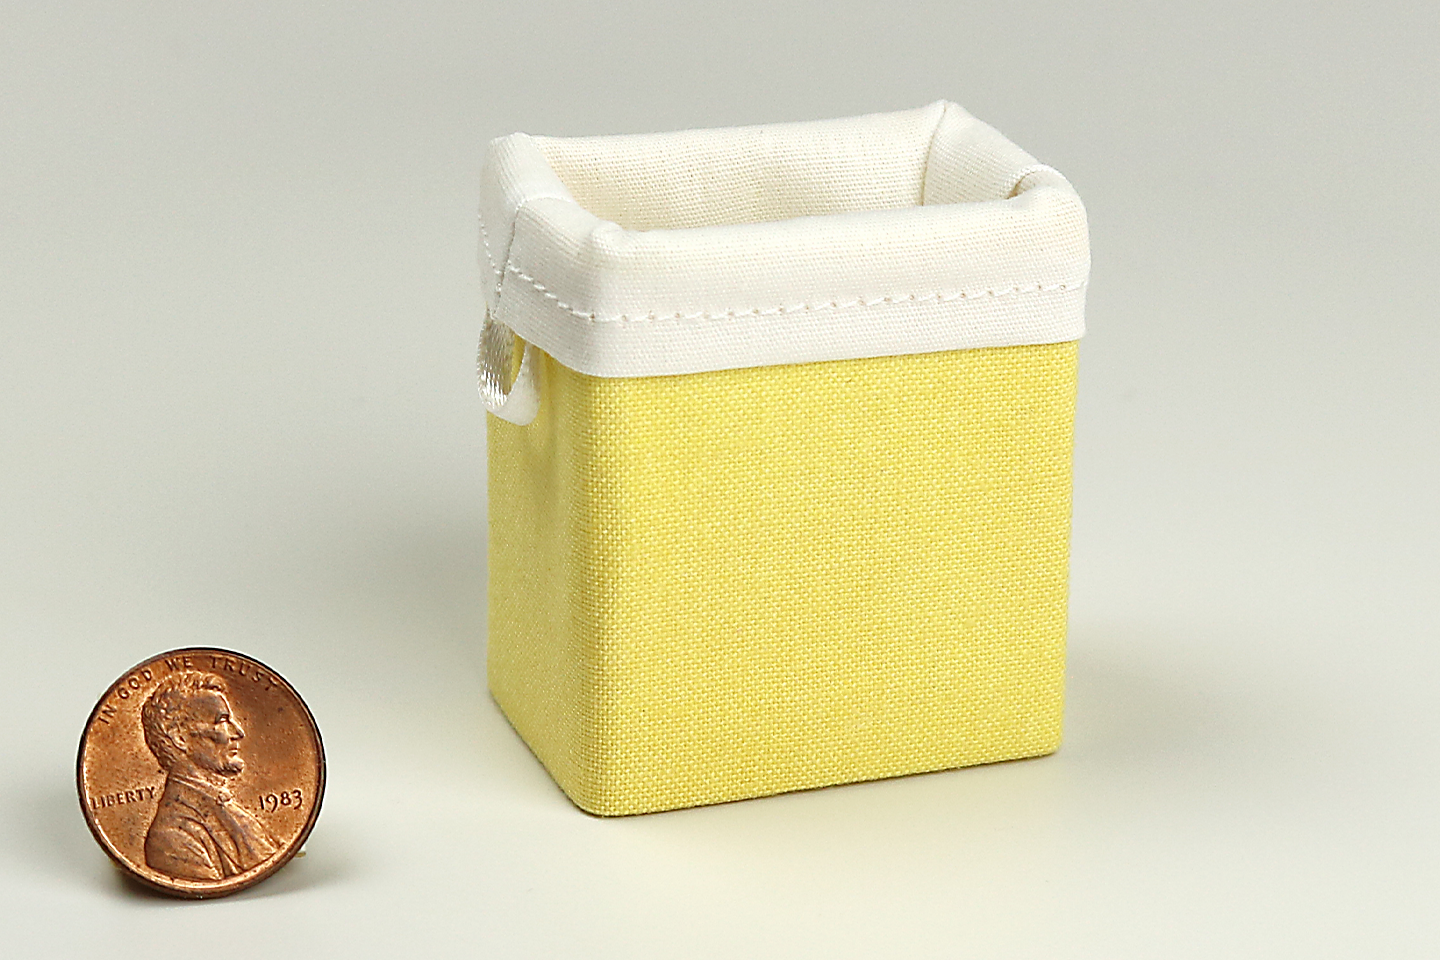 Modern Clothes Hamper in Yellow